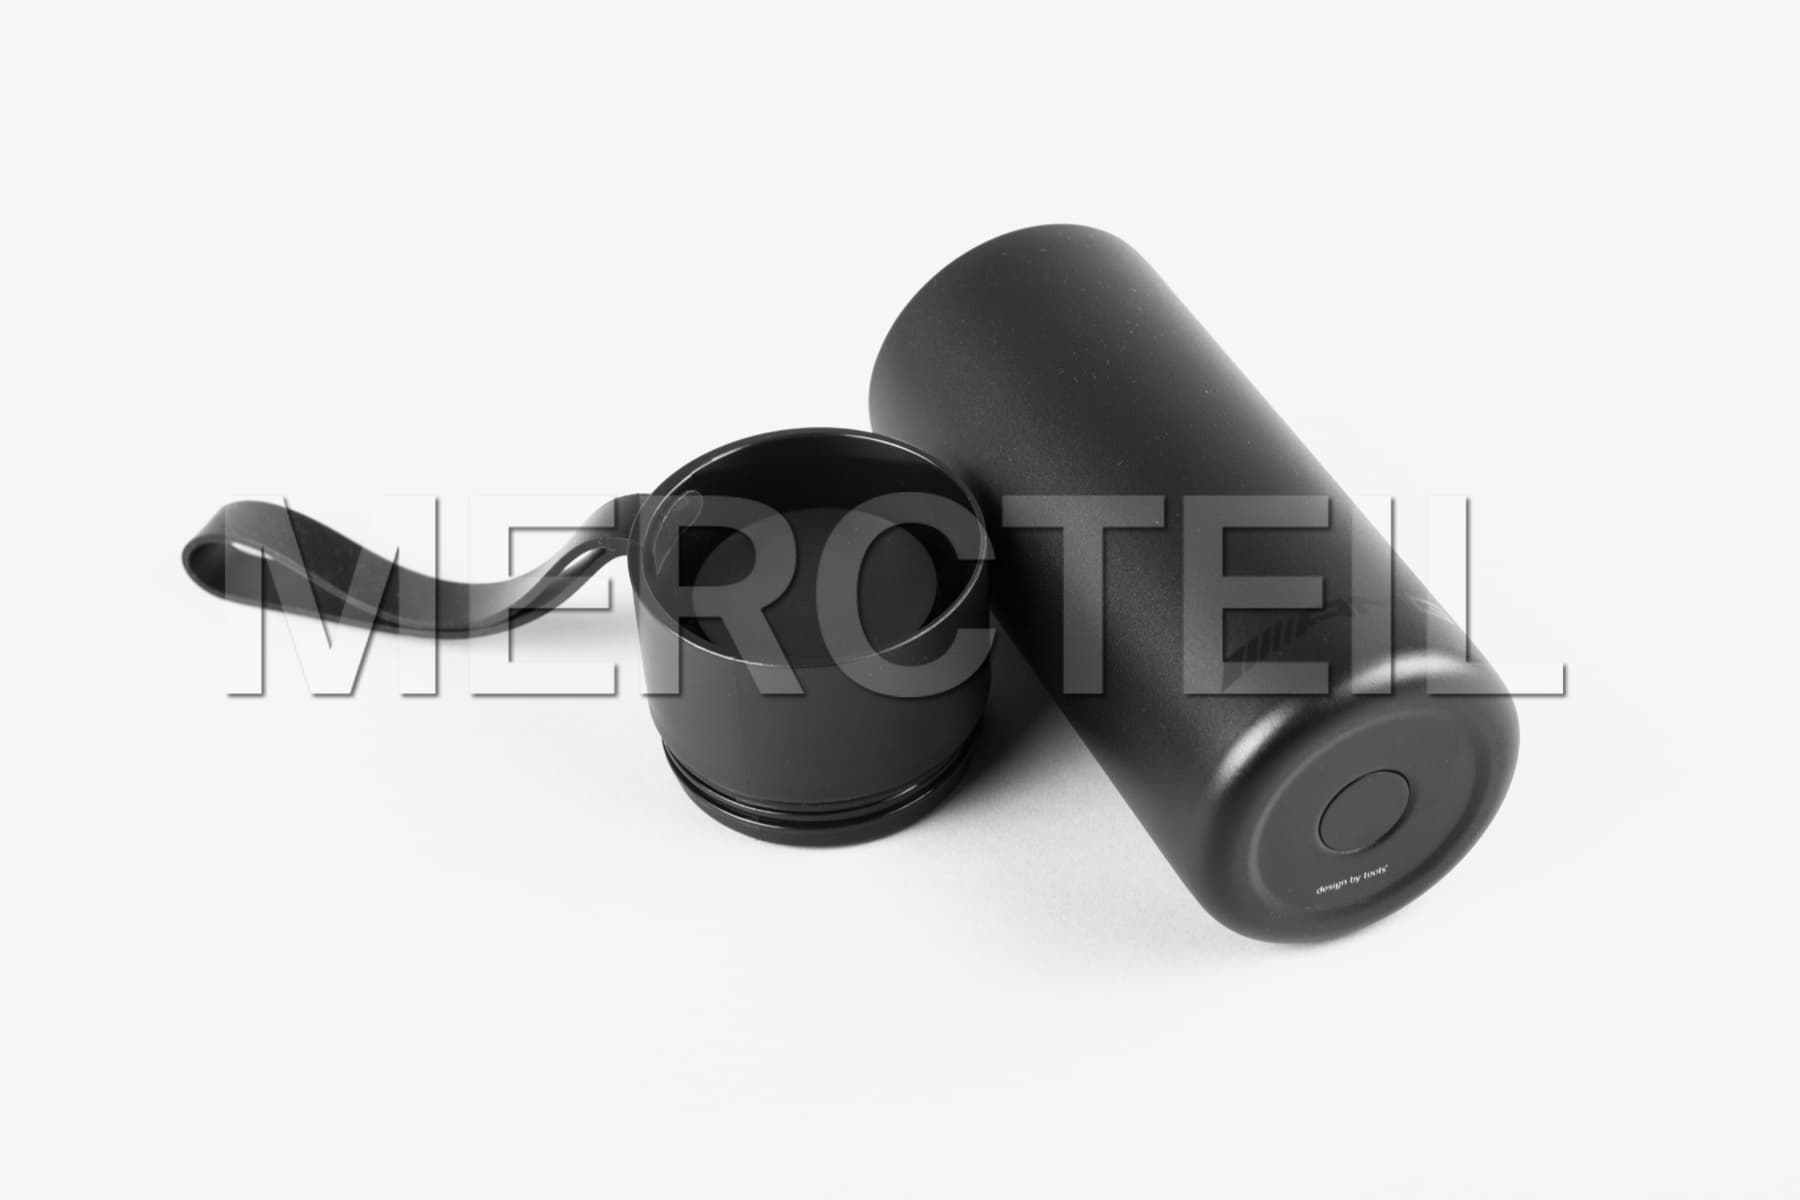 AMG Black Matte To Go Cup Genuine Mercedes-AMG Collection (part number: B66955082)